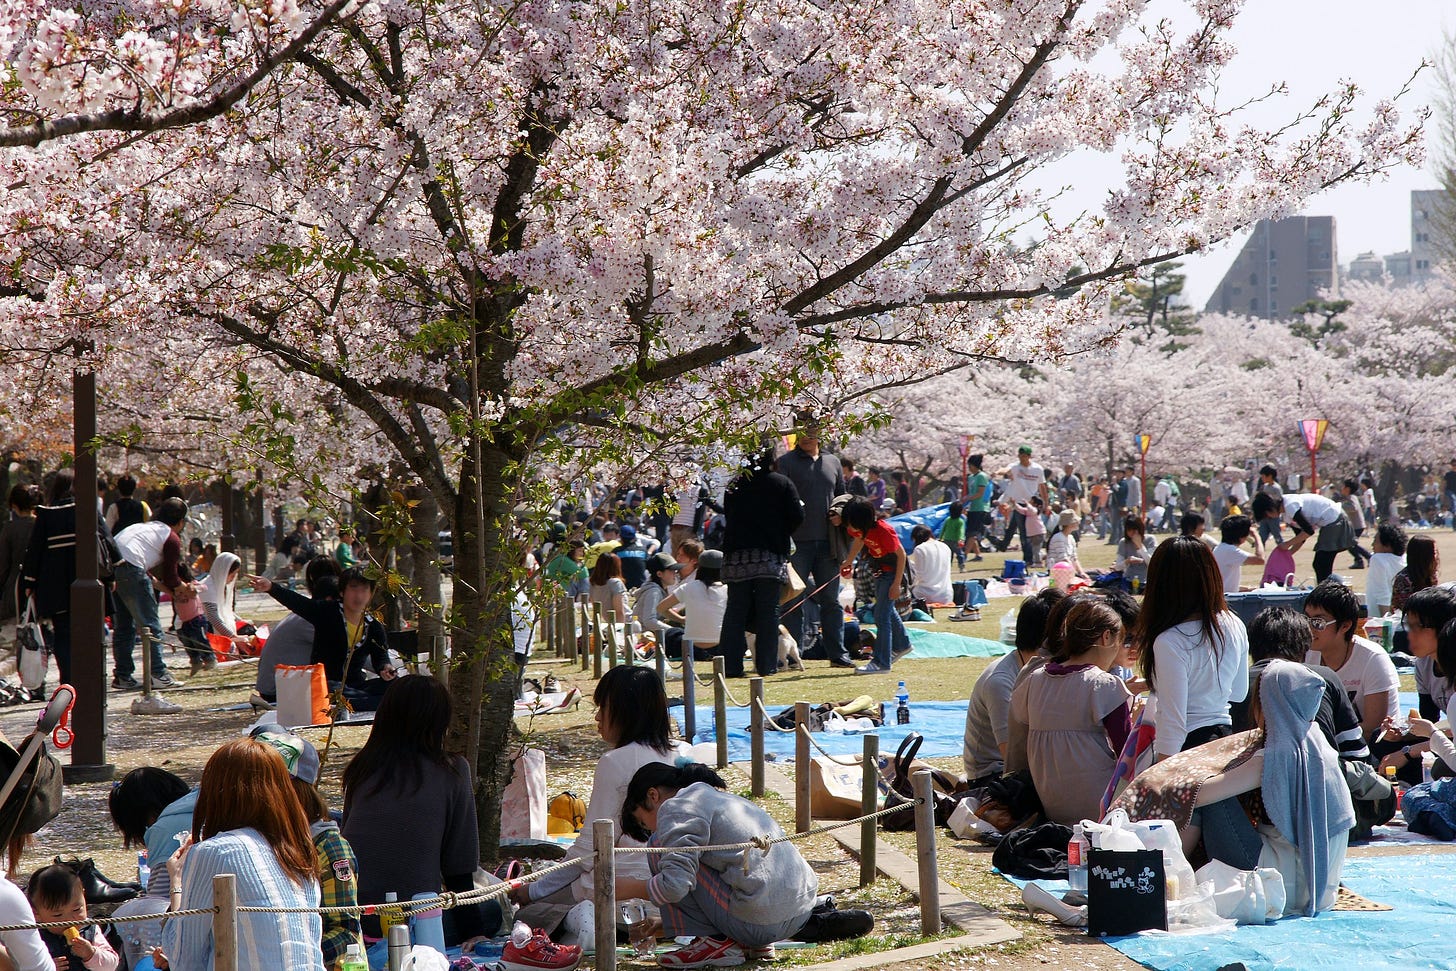 Cherry blossom viewing, Himeji Castle, 2009